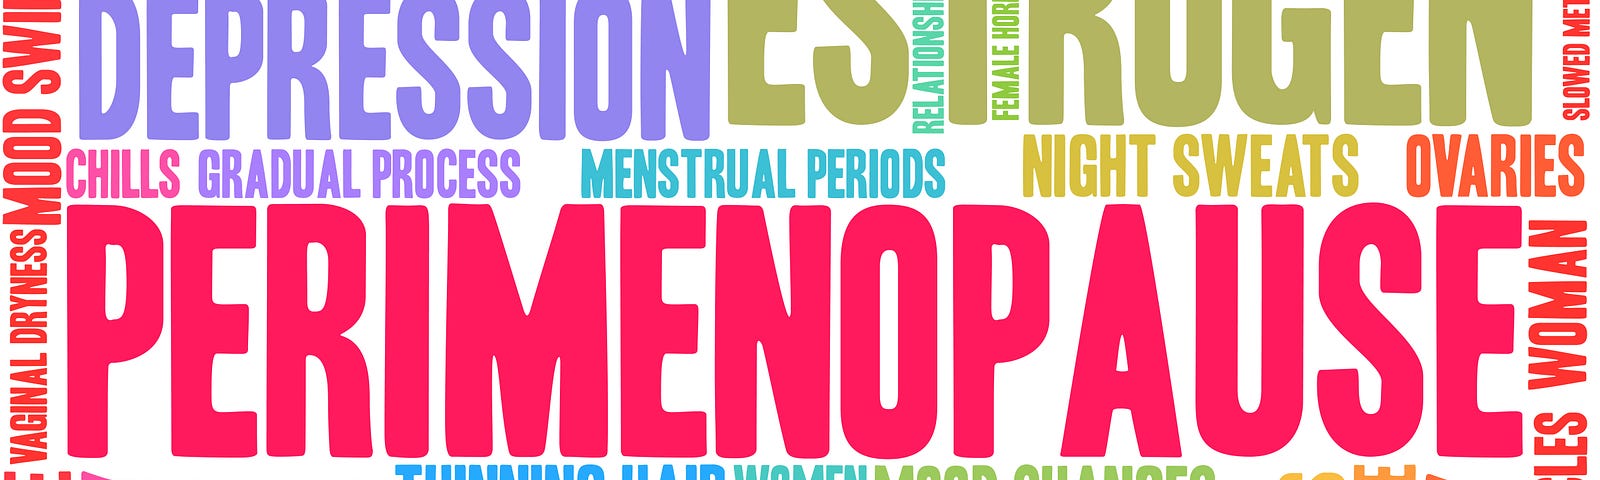 Perimenopause word map showing words related to perimenopause